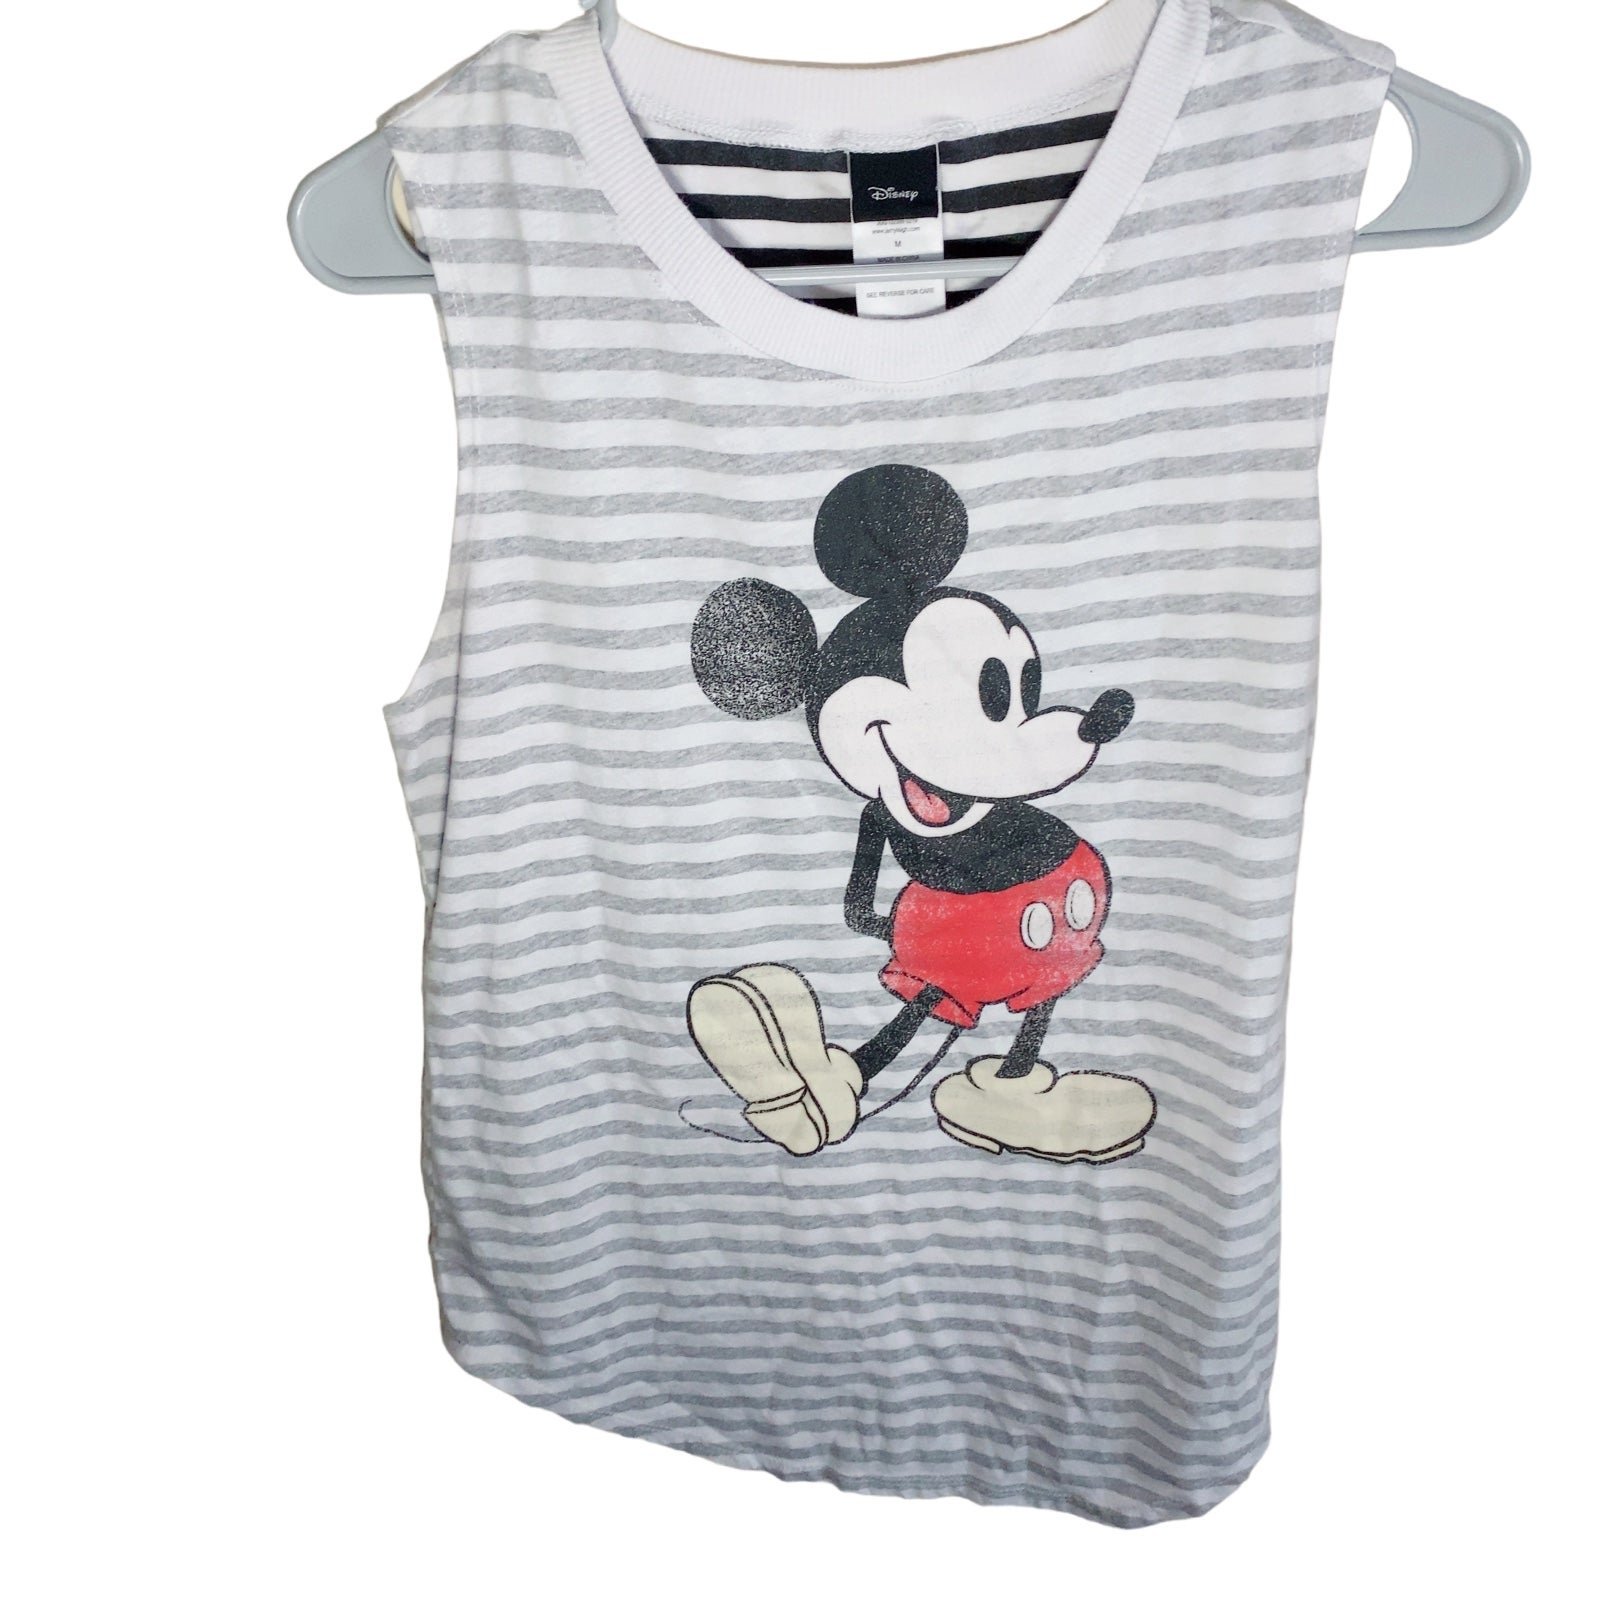 Nice Mickey Mouse shirt OkHdTtUbB Factory Price